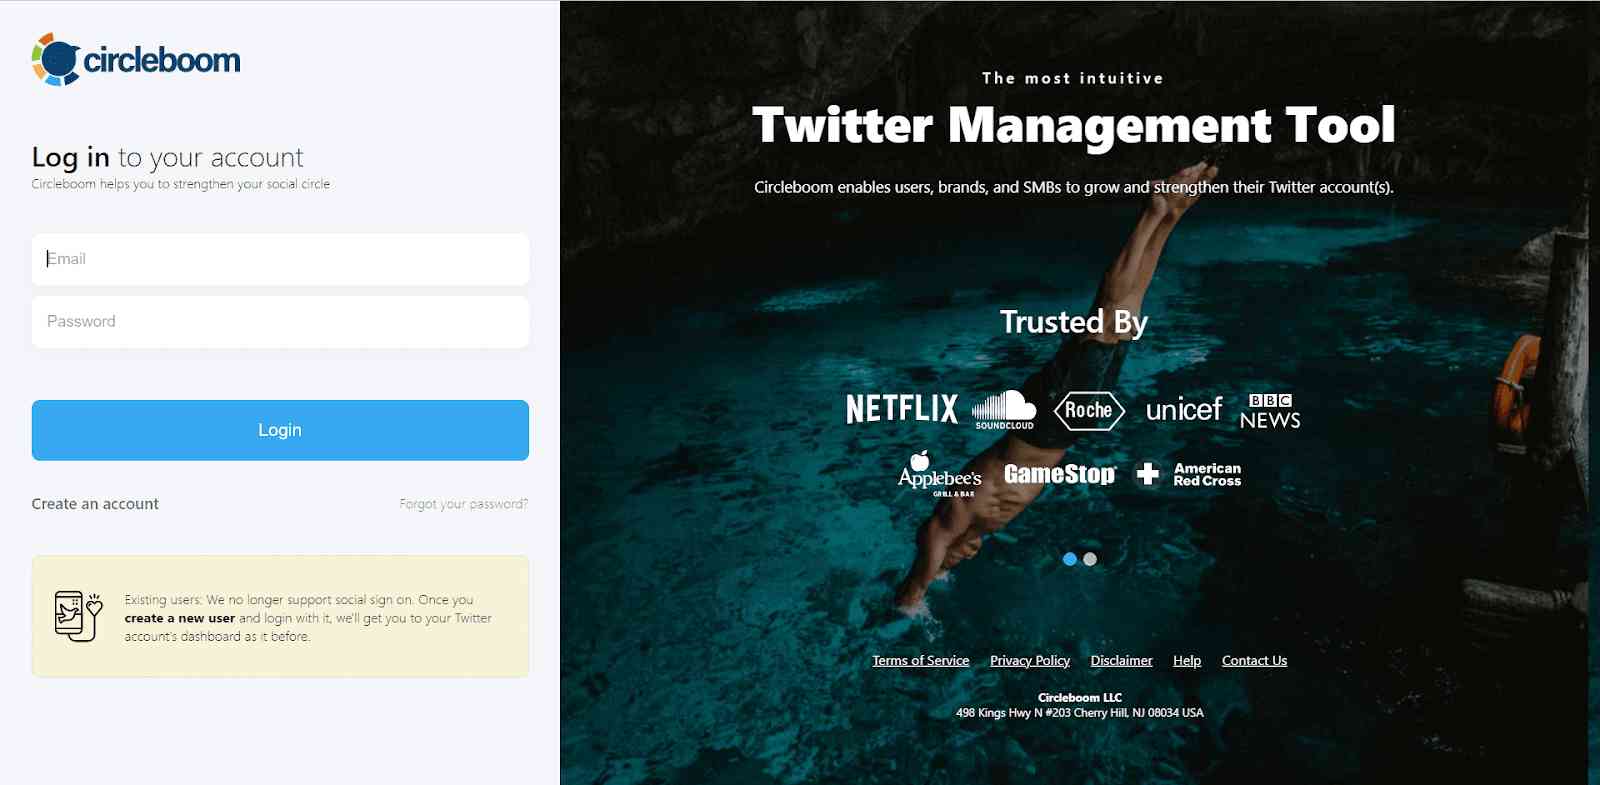 Log in to Circleboom Twitter, the most intuitive Twitter management tool.